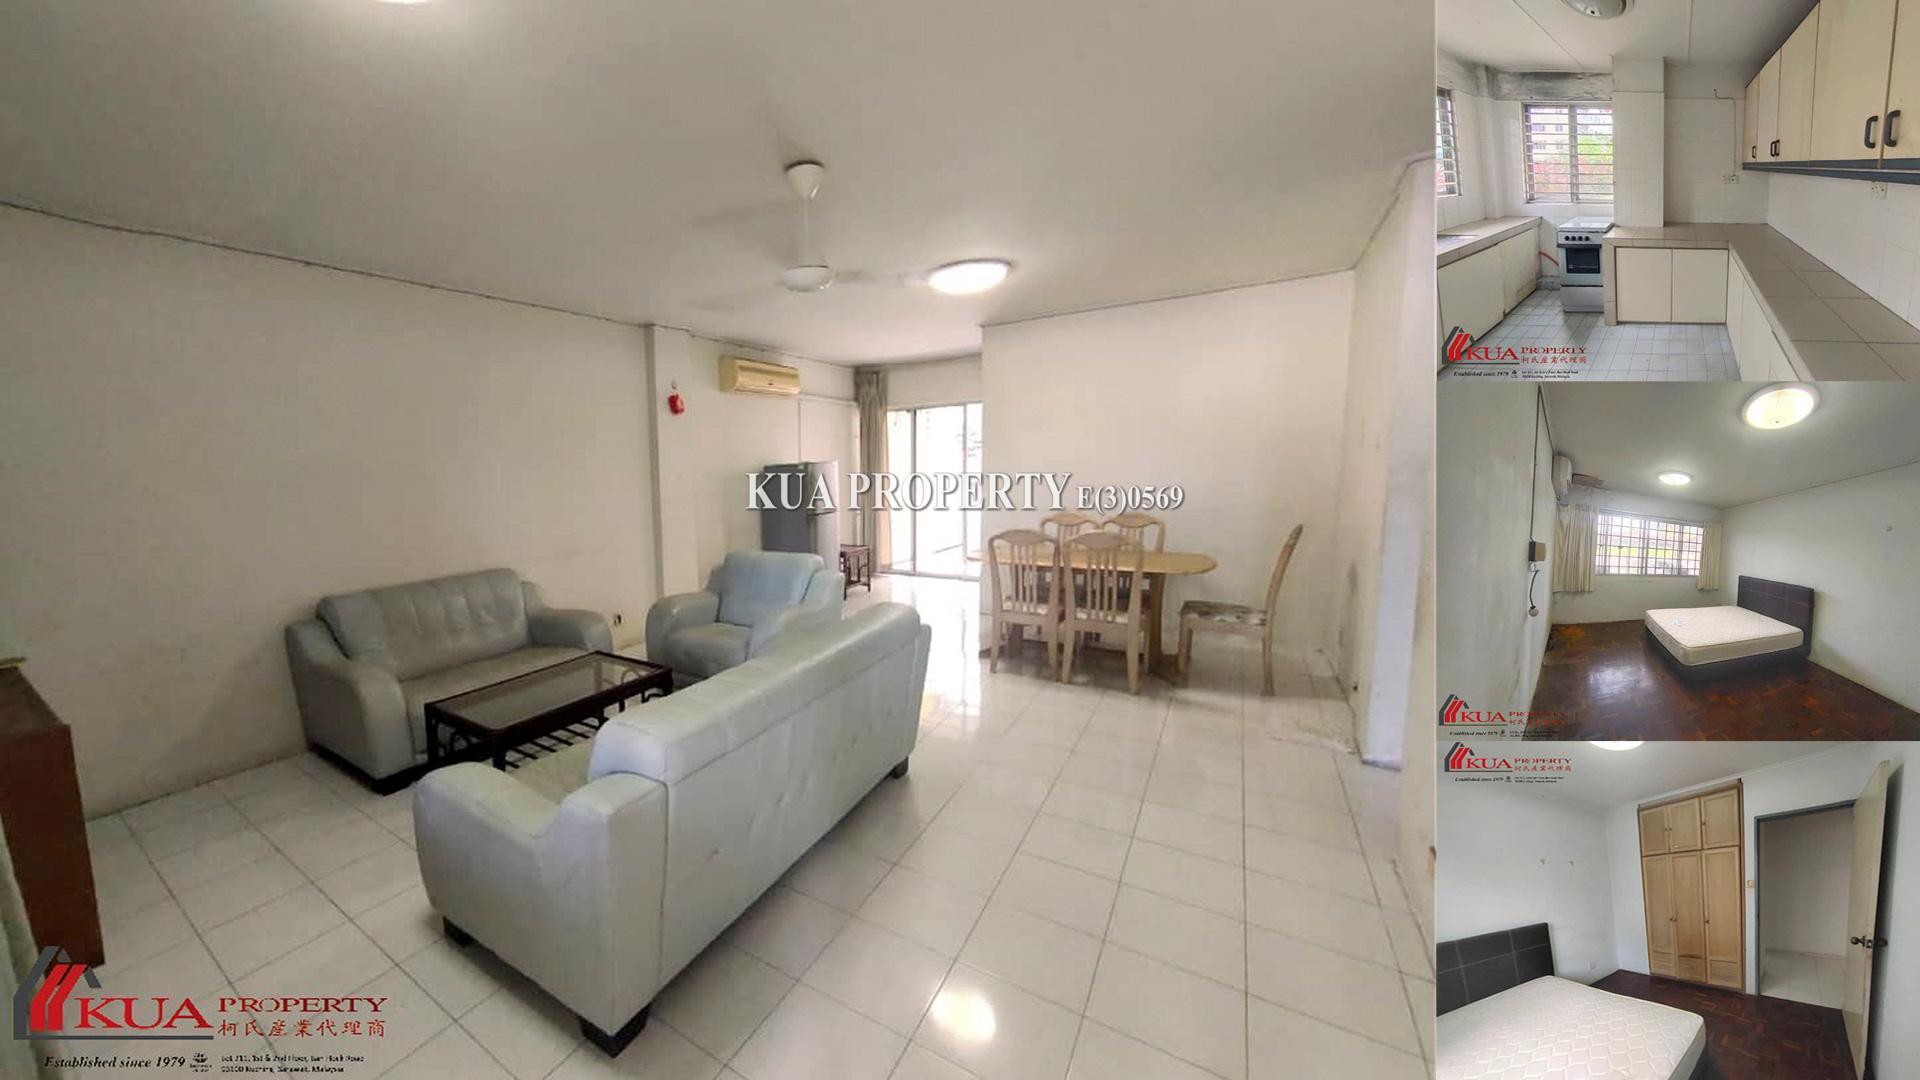 Central Court Apartment For Rent! at Jalan Central, Kuching